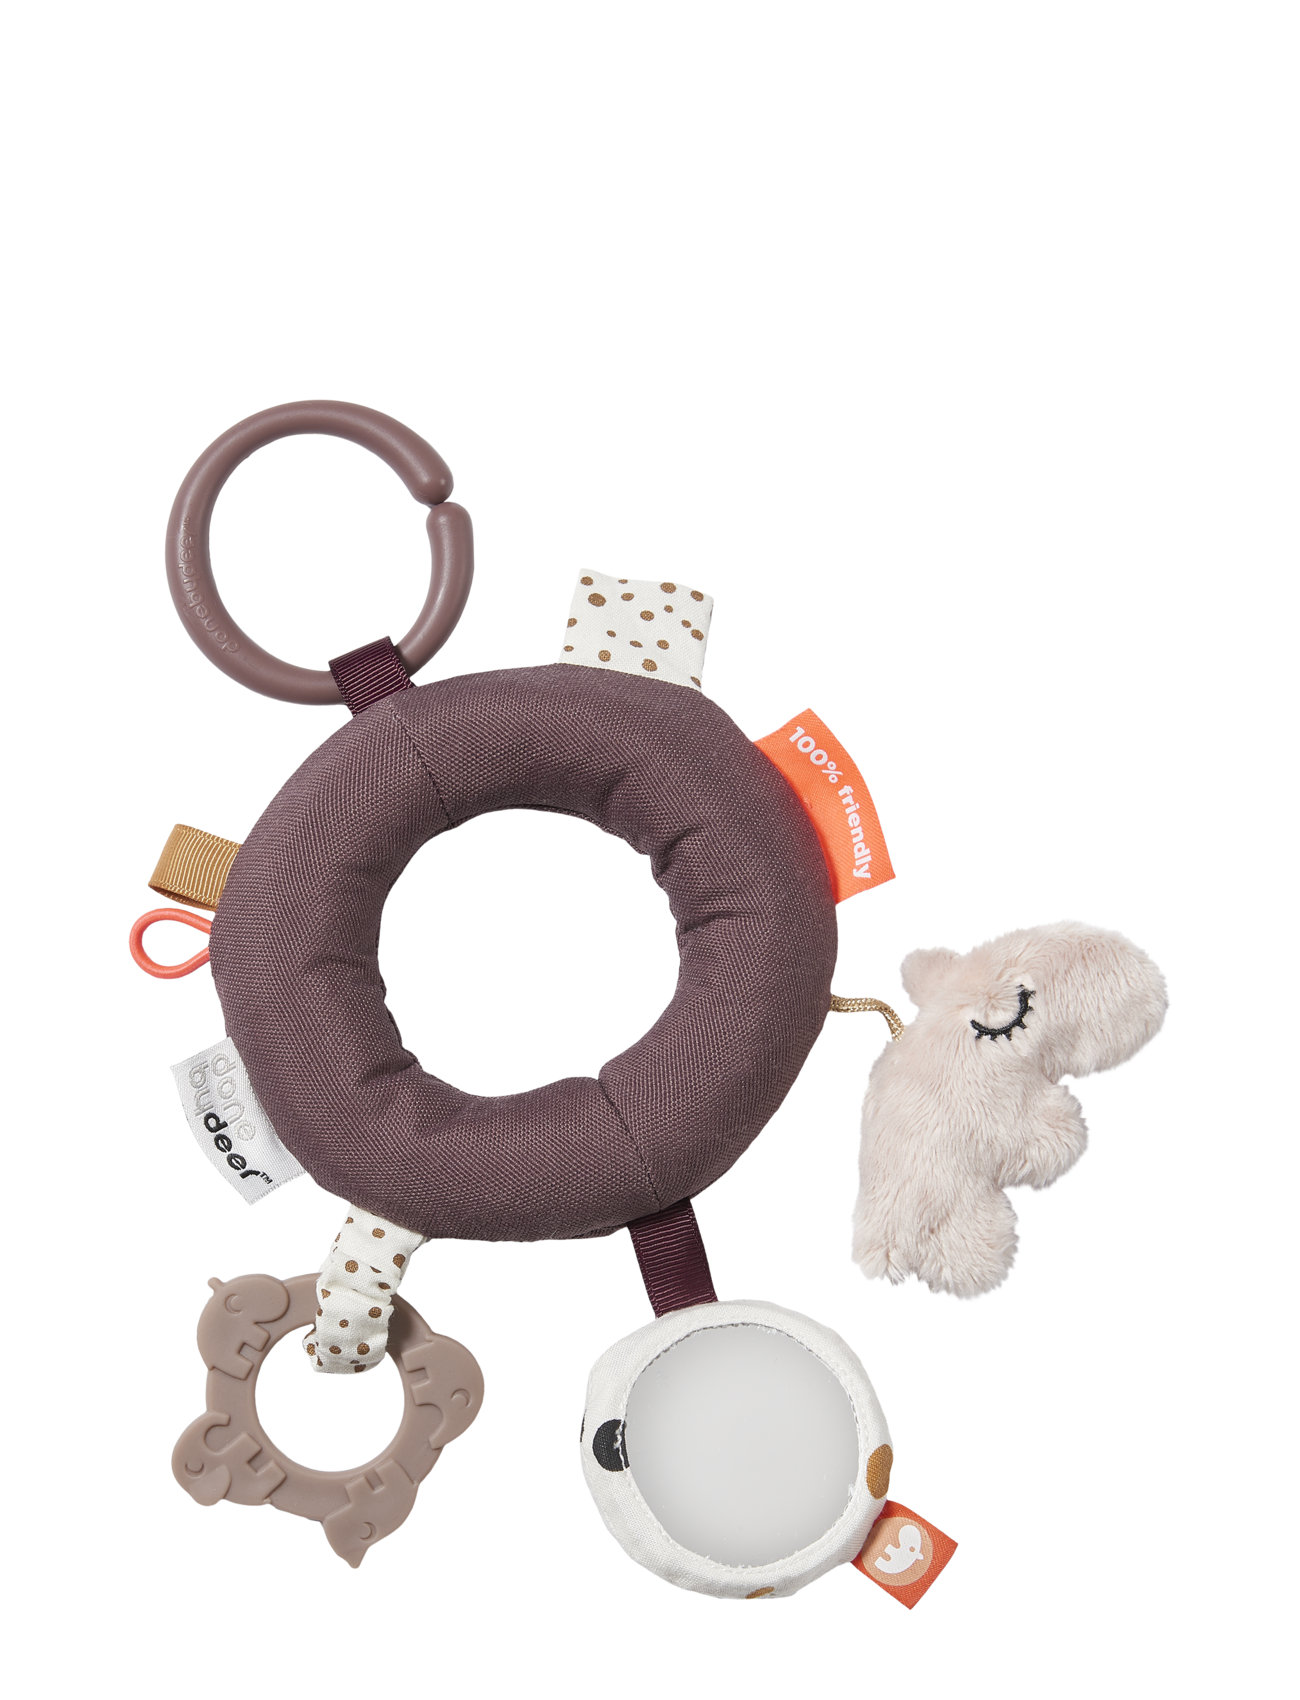 "Done by Deer" "Activity Ring Deer Friends Toys Baby Educational Activity Brown D By